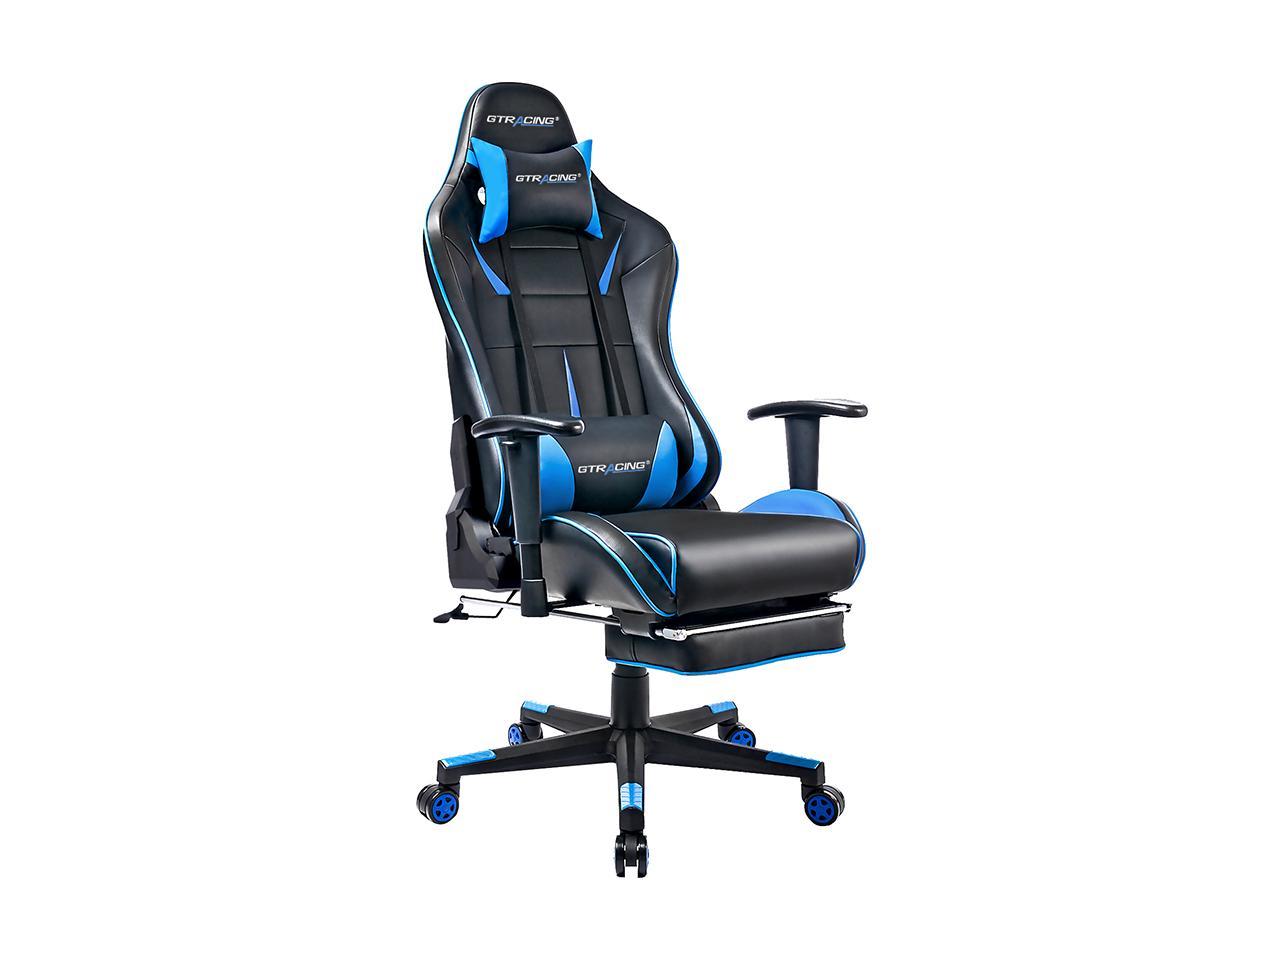 Gtracing Gaming Chair Ergonomic Office Chair With Footrest Heavy Duty E Sports Chair For Pro Gamer Seat Height Adjustable Multifunction Recliner With Headrest And Lumbar Support Pillow Gt909 Newegg Com